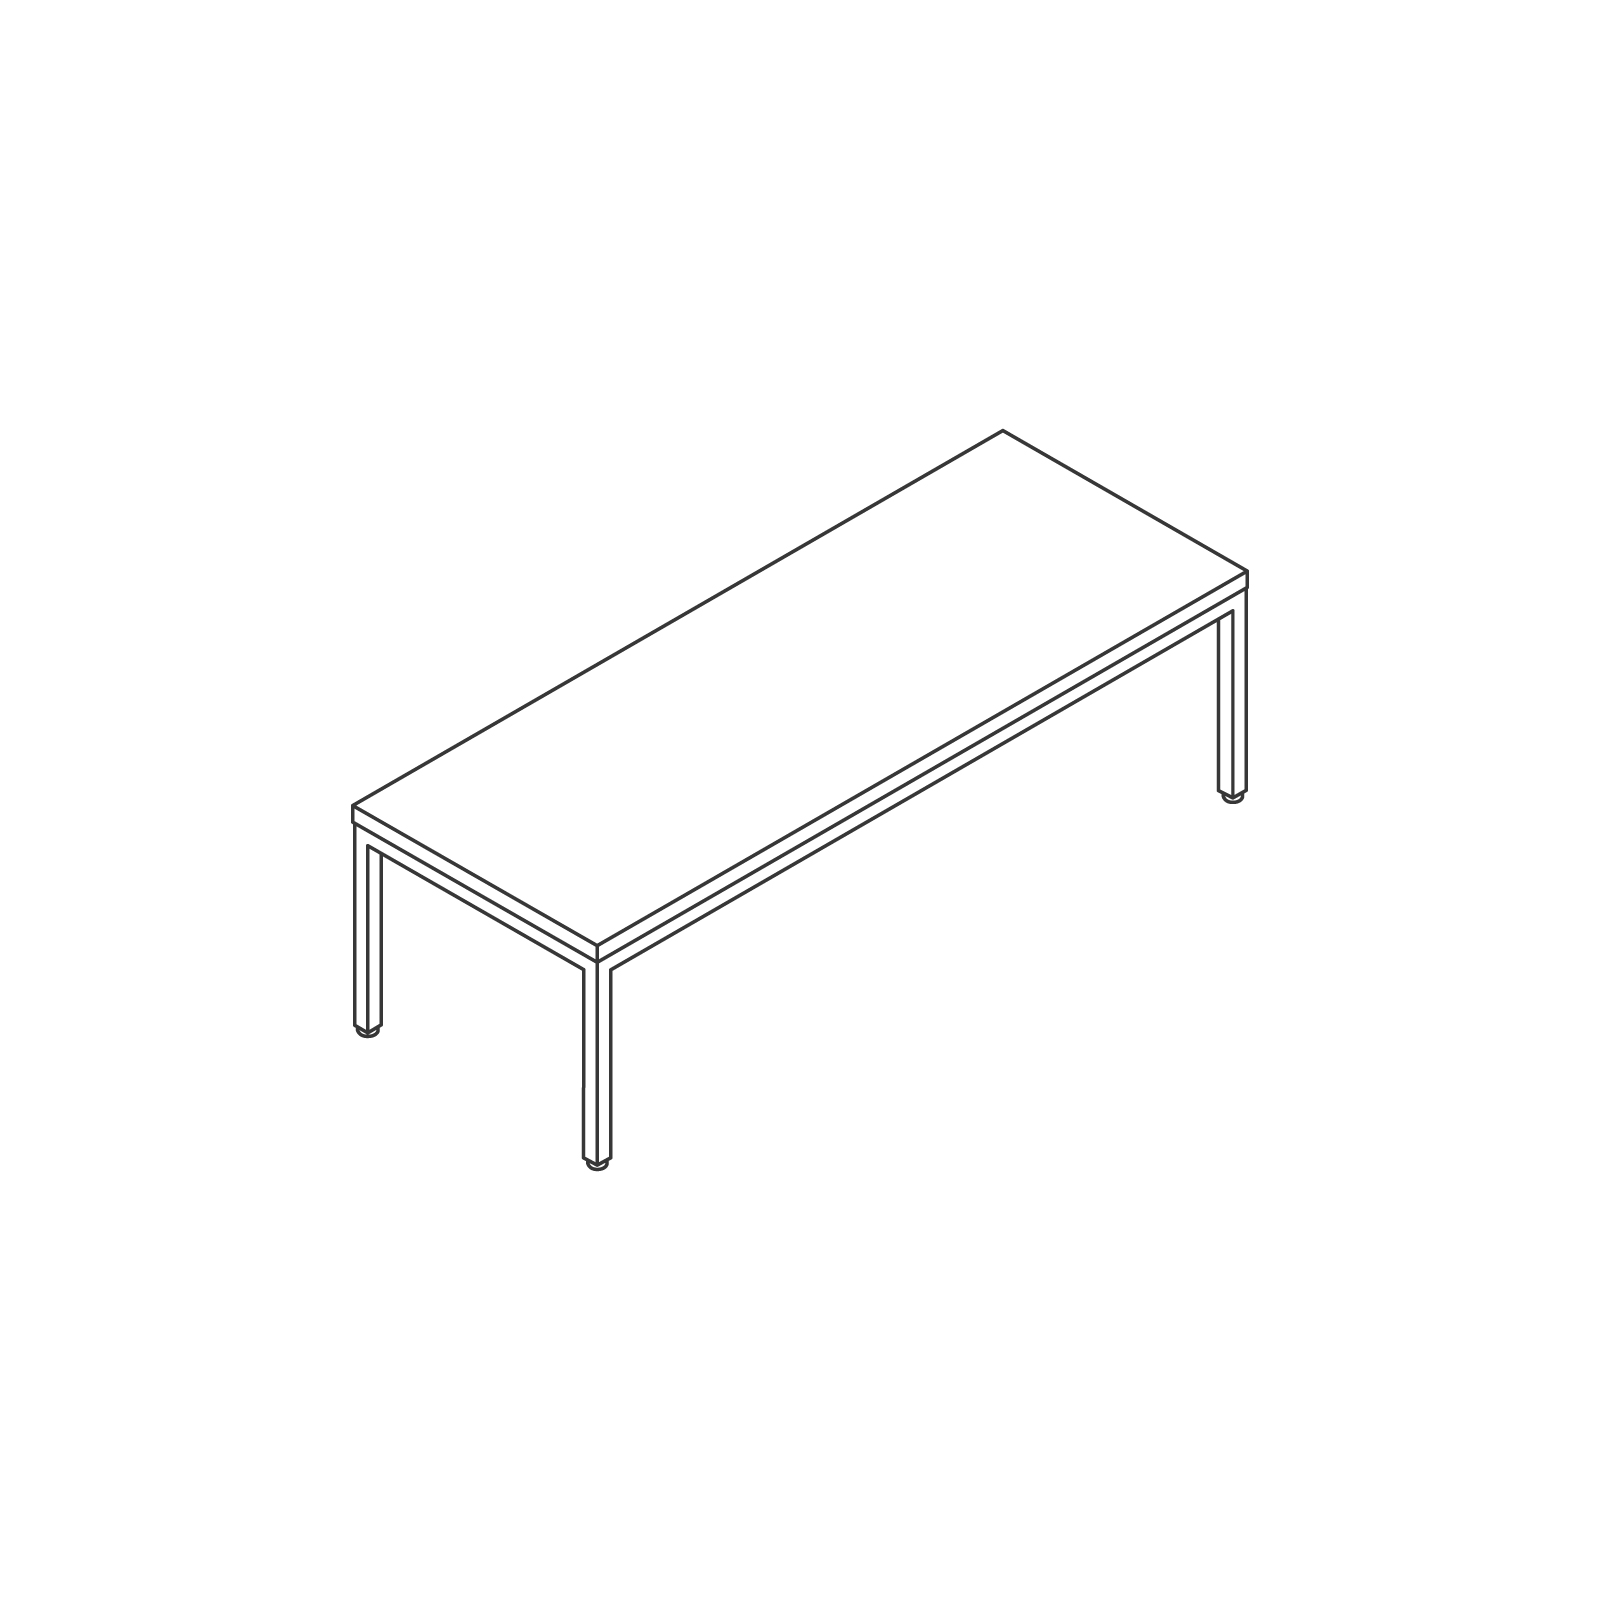 A line drawing - Nemschoff Riva Coffee Table